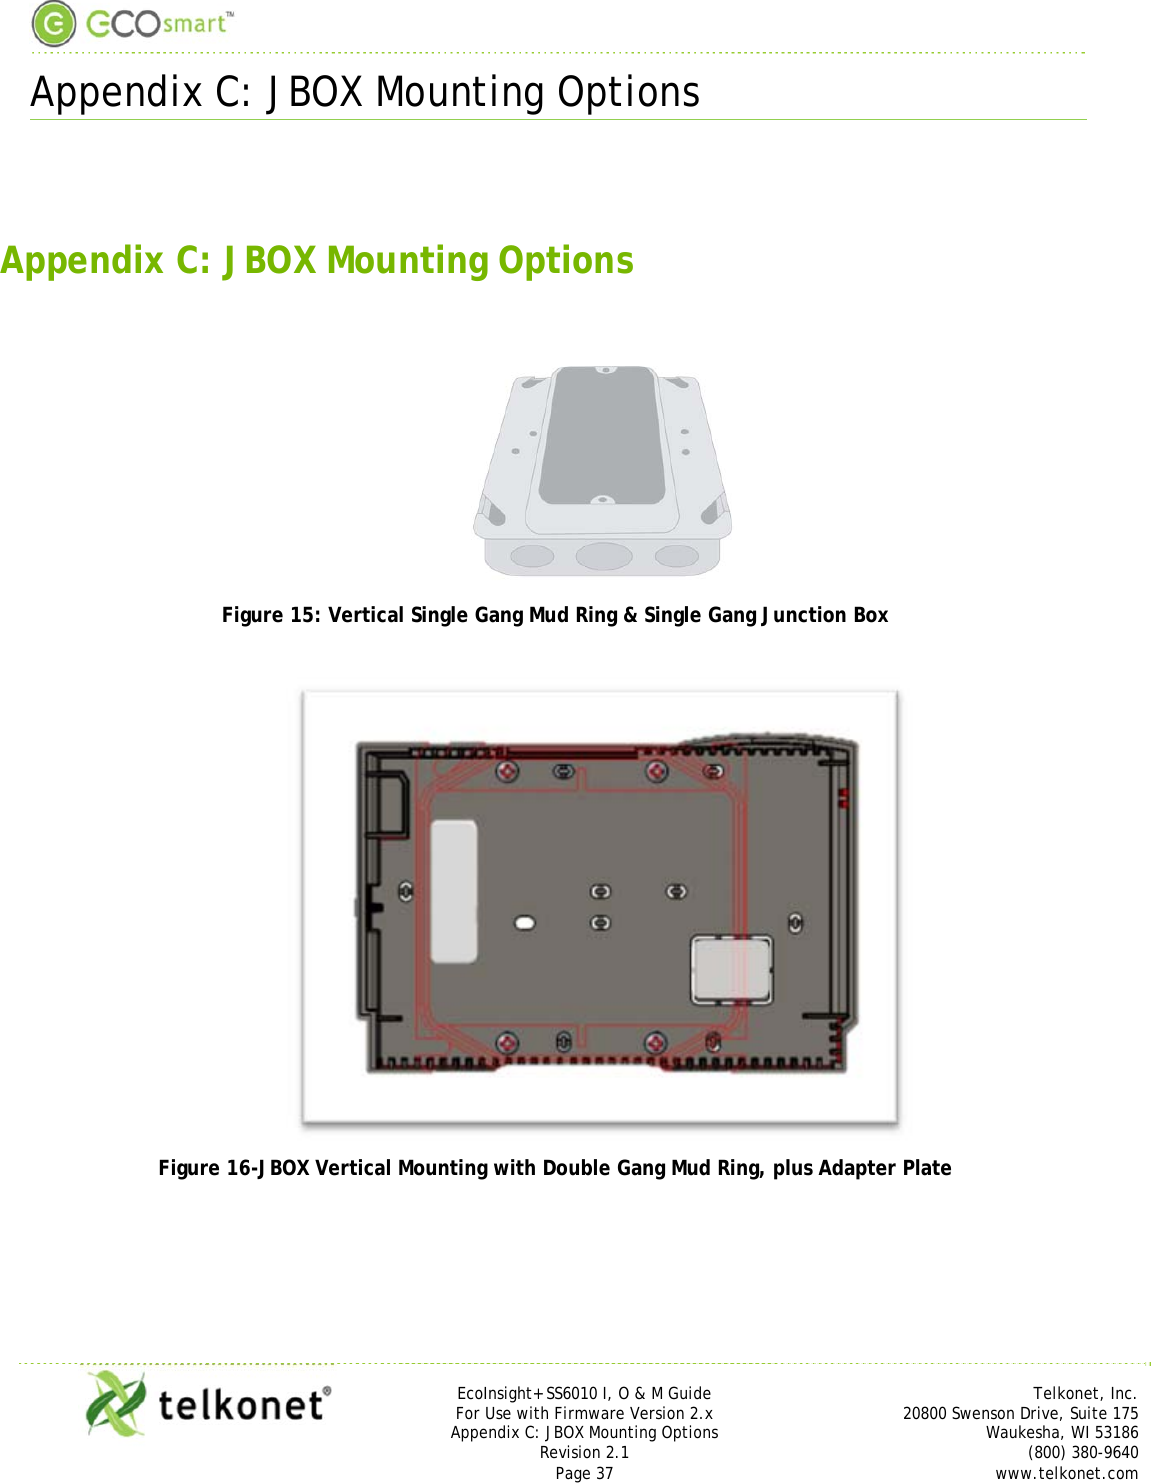  Appendix C: JBOX Mounting Options     EcoInsight+ SS6010 I, O &amp; M Guide Telkonet, Inc. For Use with Firmware Version 2.x 20800 Swenson Drive, Suite 175 Appendix C: JBOX Mounting Options Waukesha, WI 53186 Revision 2.1   (800) 380-9640 Page 37  www.telkonet.com   Appendix C: JBOX Mounting Options   Figure 15: Vertical Single Gang Mud Ring &amp; Single Gang Junction Box   Figure 16-JBOX Vertical Mounting with Double Gang Mud Ring, plus Adapter Plate   